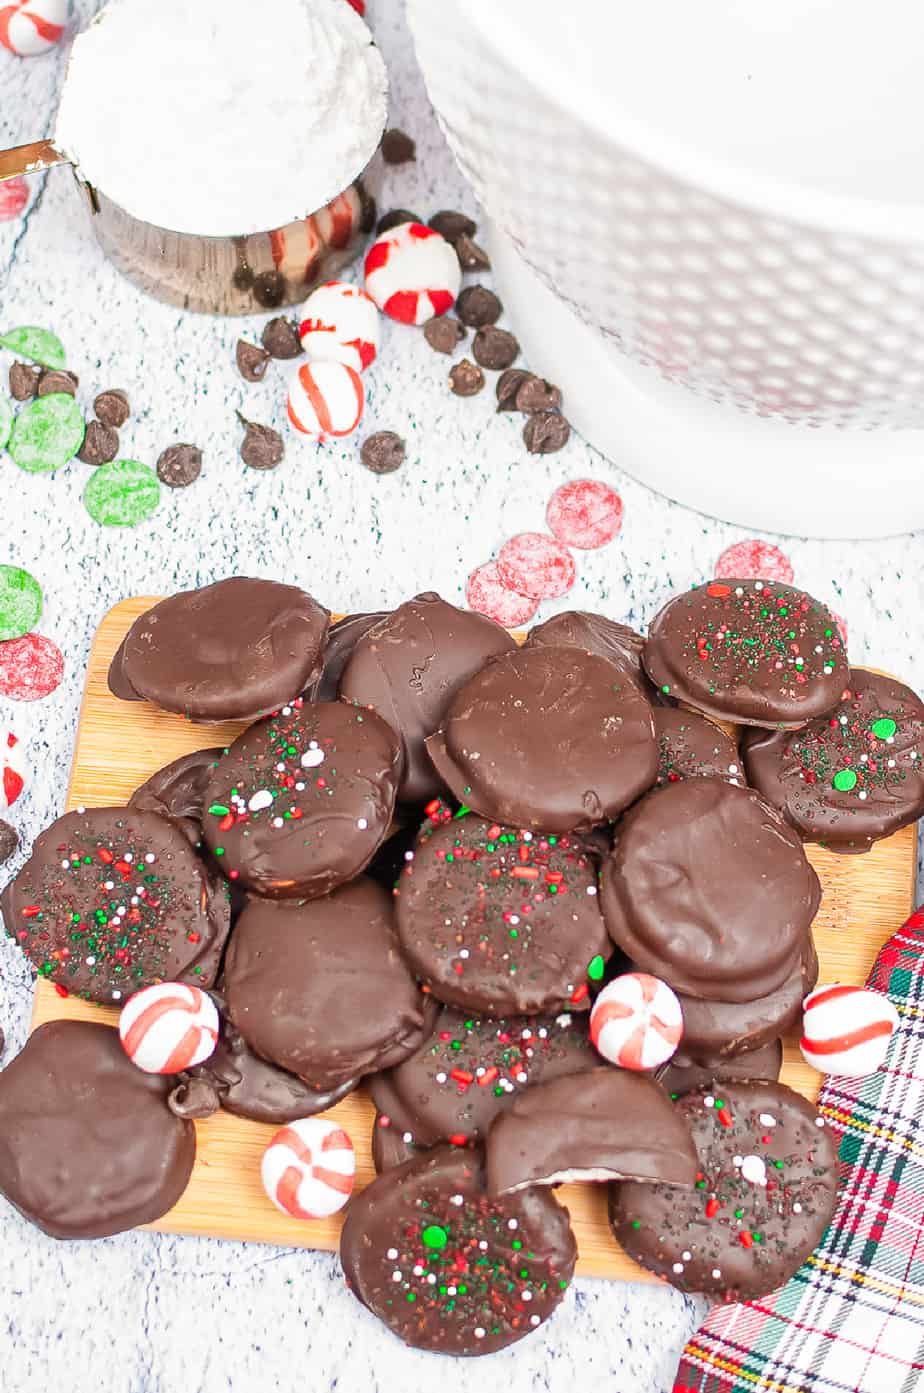 Stacks of peppermint patties dipped in chocolate on a cutting board with other peppermint candies on a cutting board.